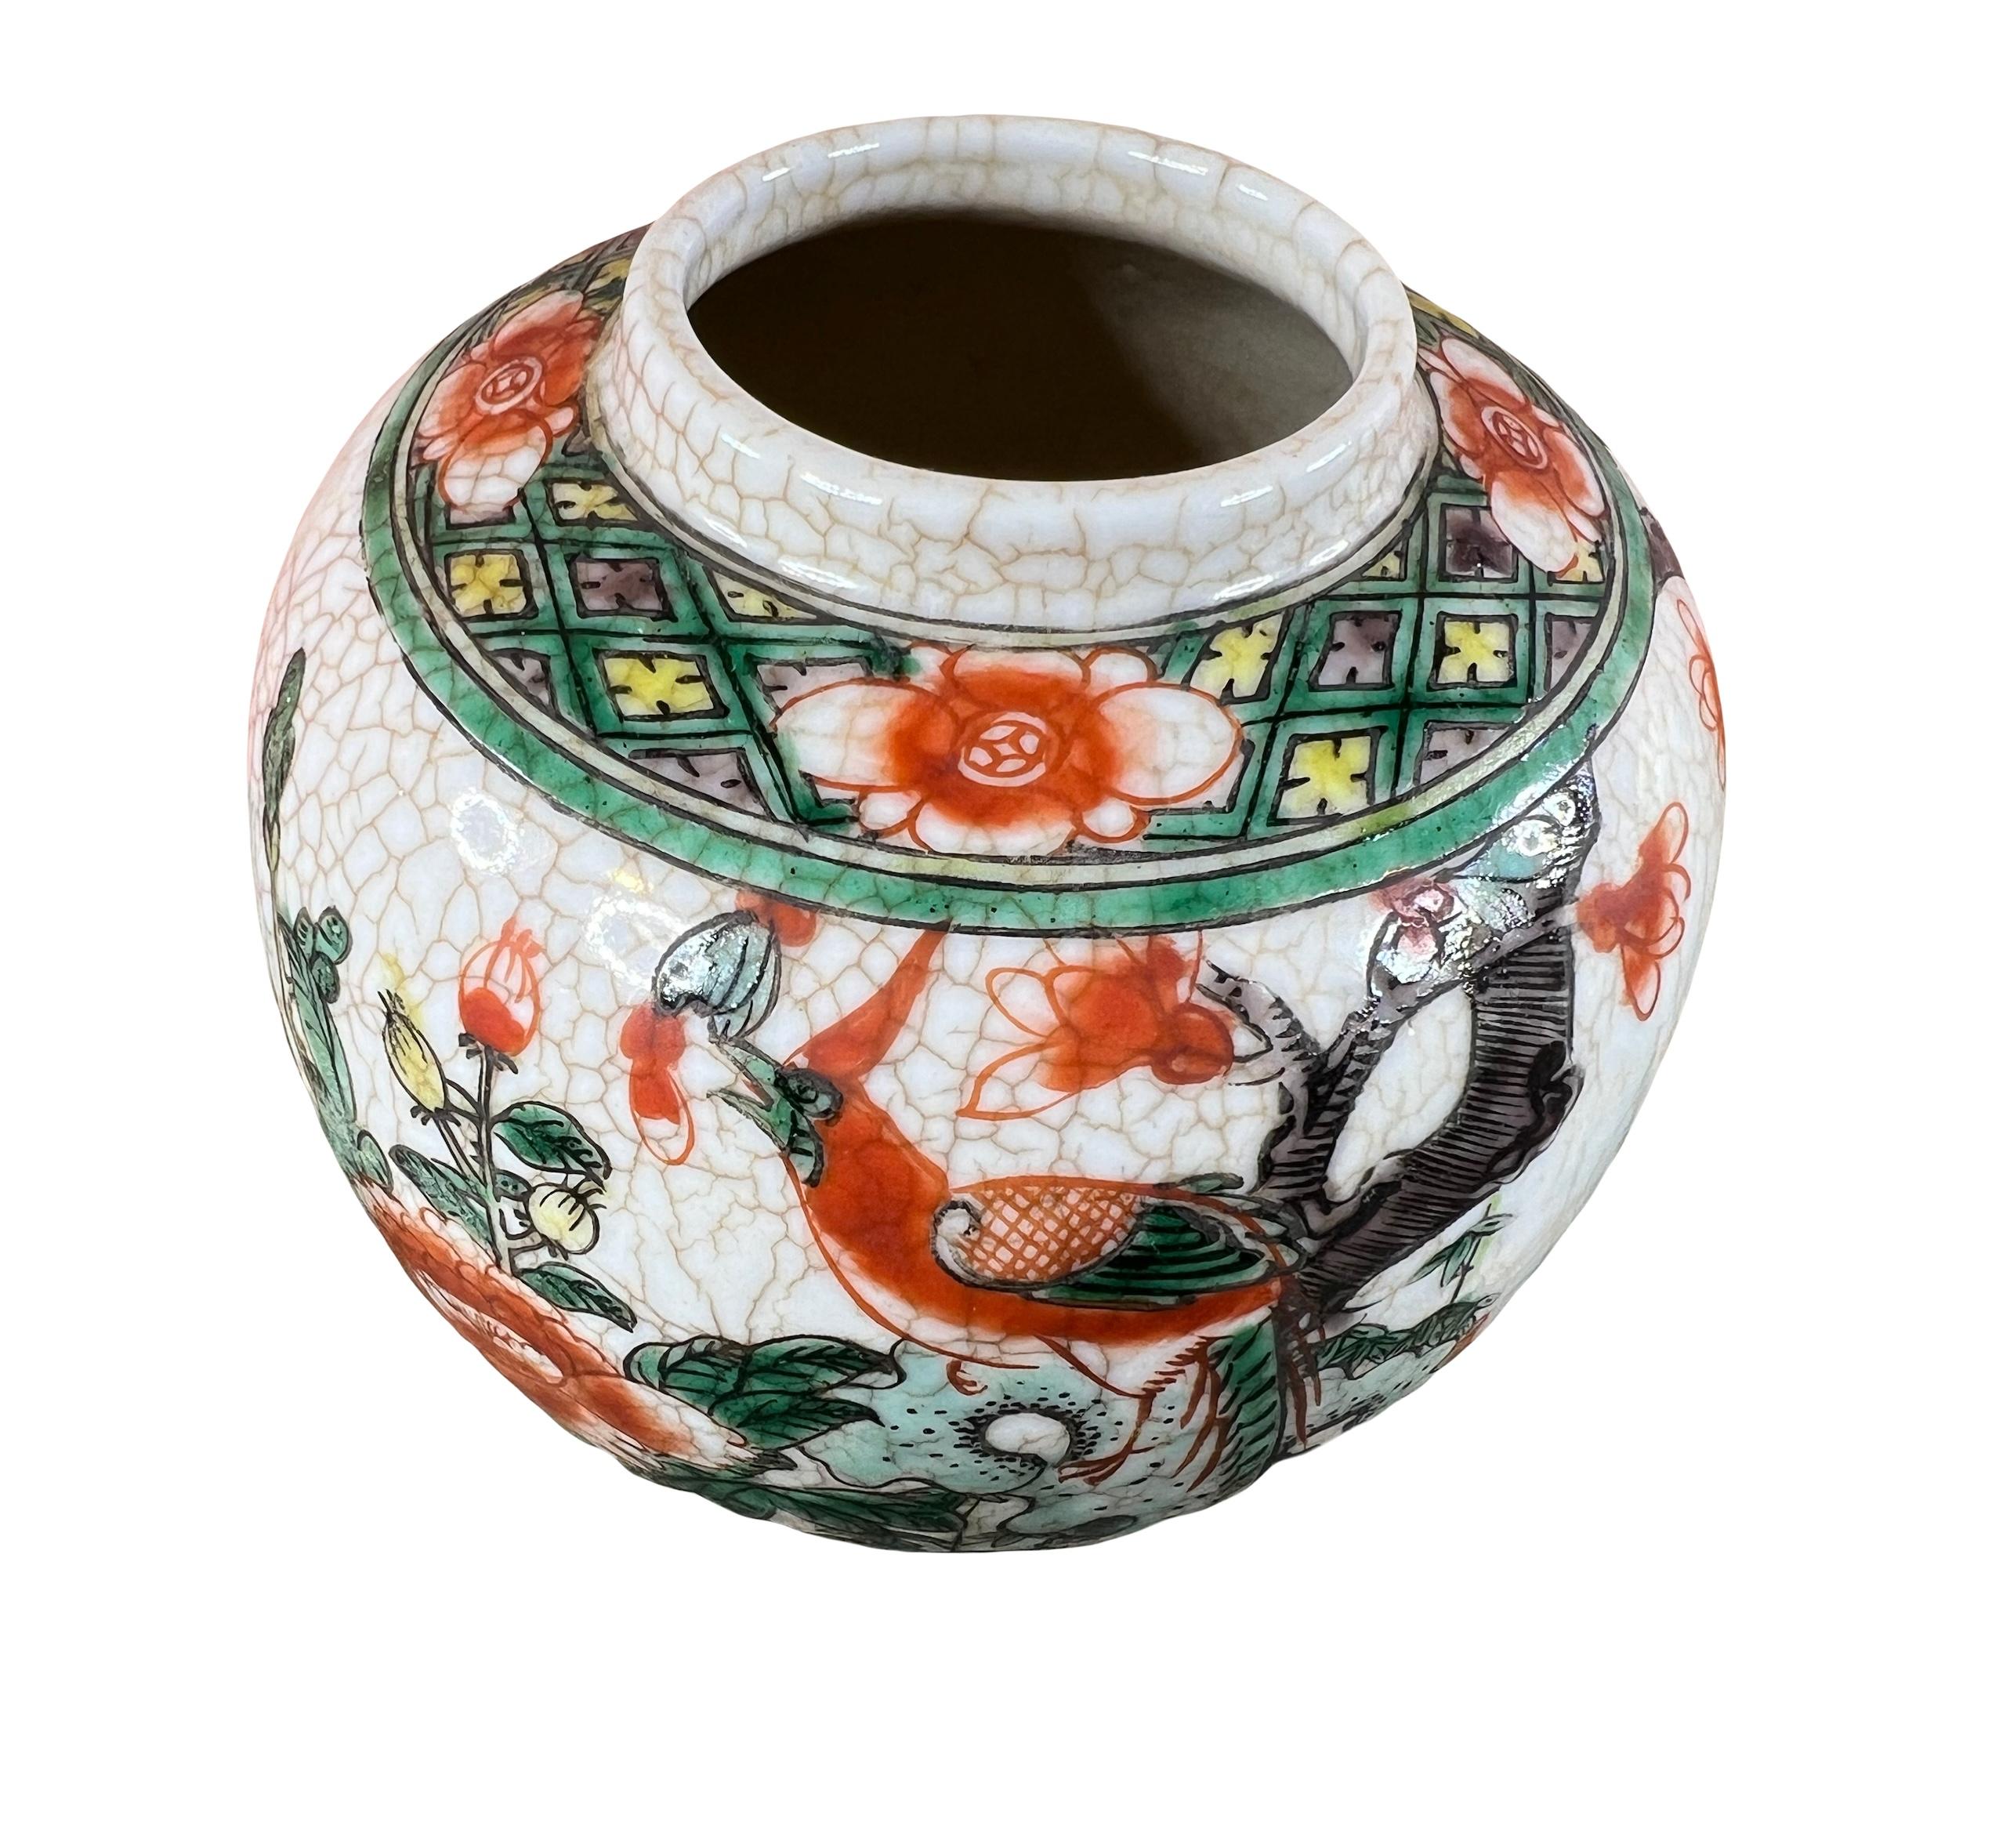 This Chinese ginger jar in ceramic is a true work of art. Its elegant decoration featuring a pheasant and flowering branches adds an Asian charm to your space. 

Dating from the late 19th or early 20th century, it reflects traditional Chinese